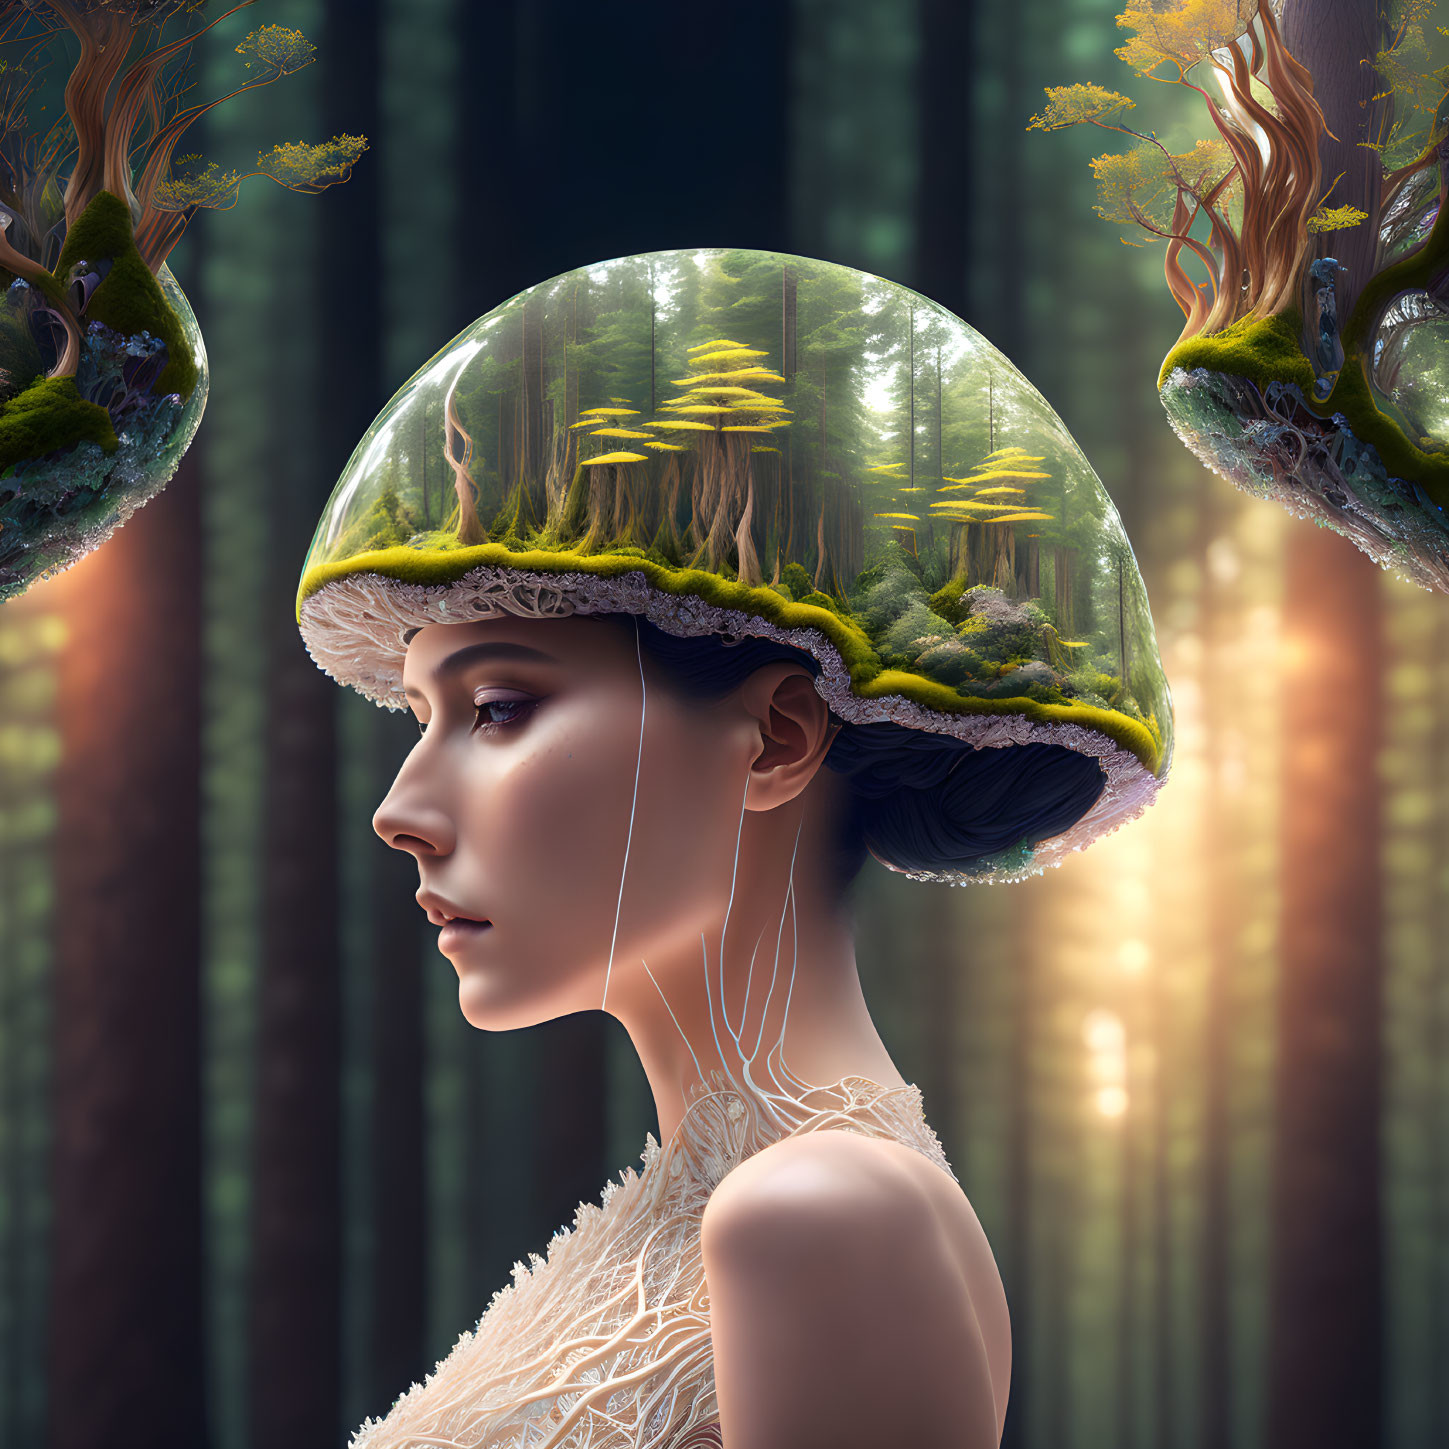 Translucent helmet with miniature forest on woman's head surrounded by tall trees